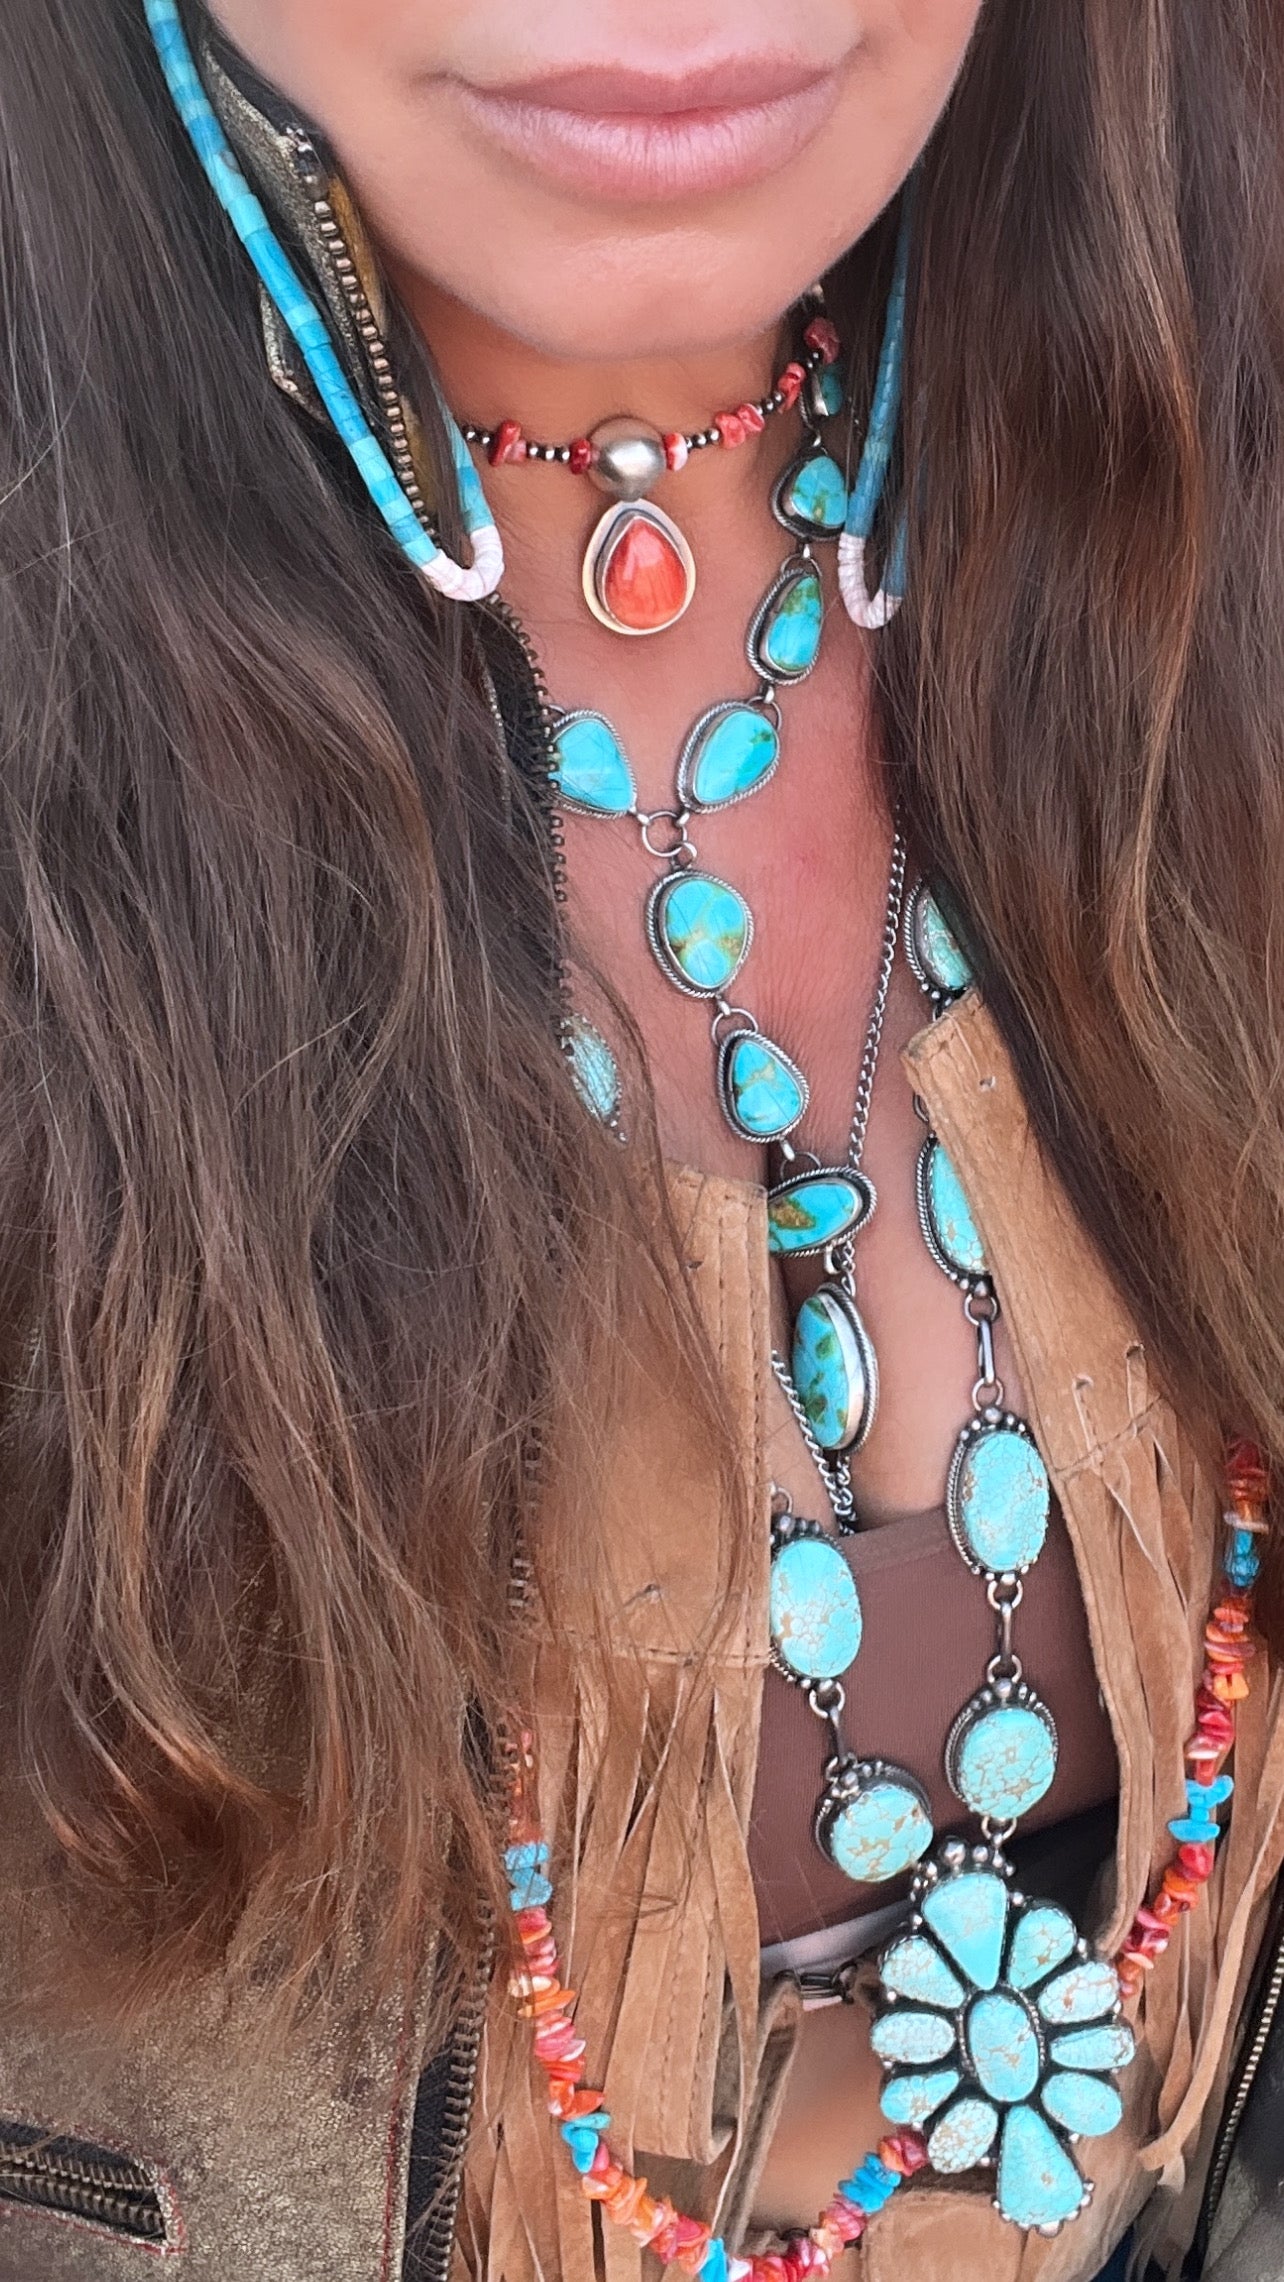 
                  
                    A person wearing a fringed tan leather jacket, a brown top, and layered turquoise jewelry crafted by Native American artisans, including necklaces, earrings, and a Wrap Around Spiny Oyster Shell Choker Necklace.
                  
                